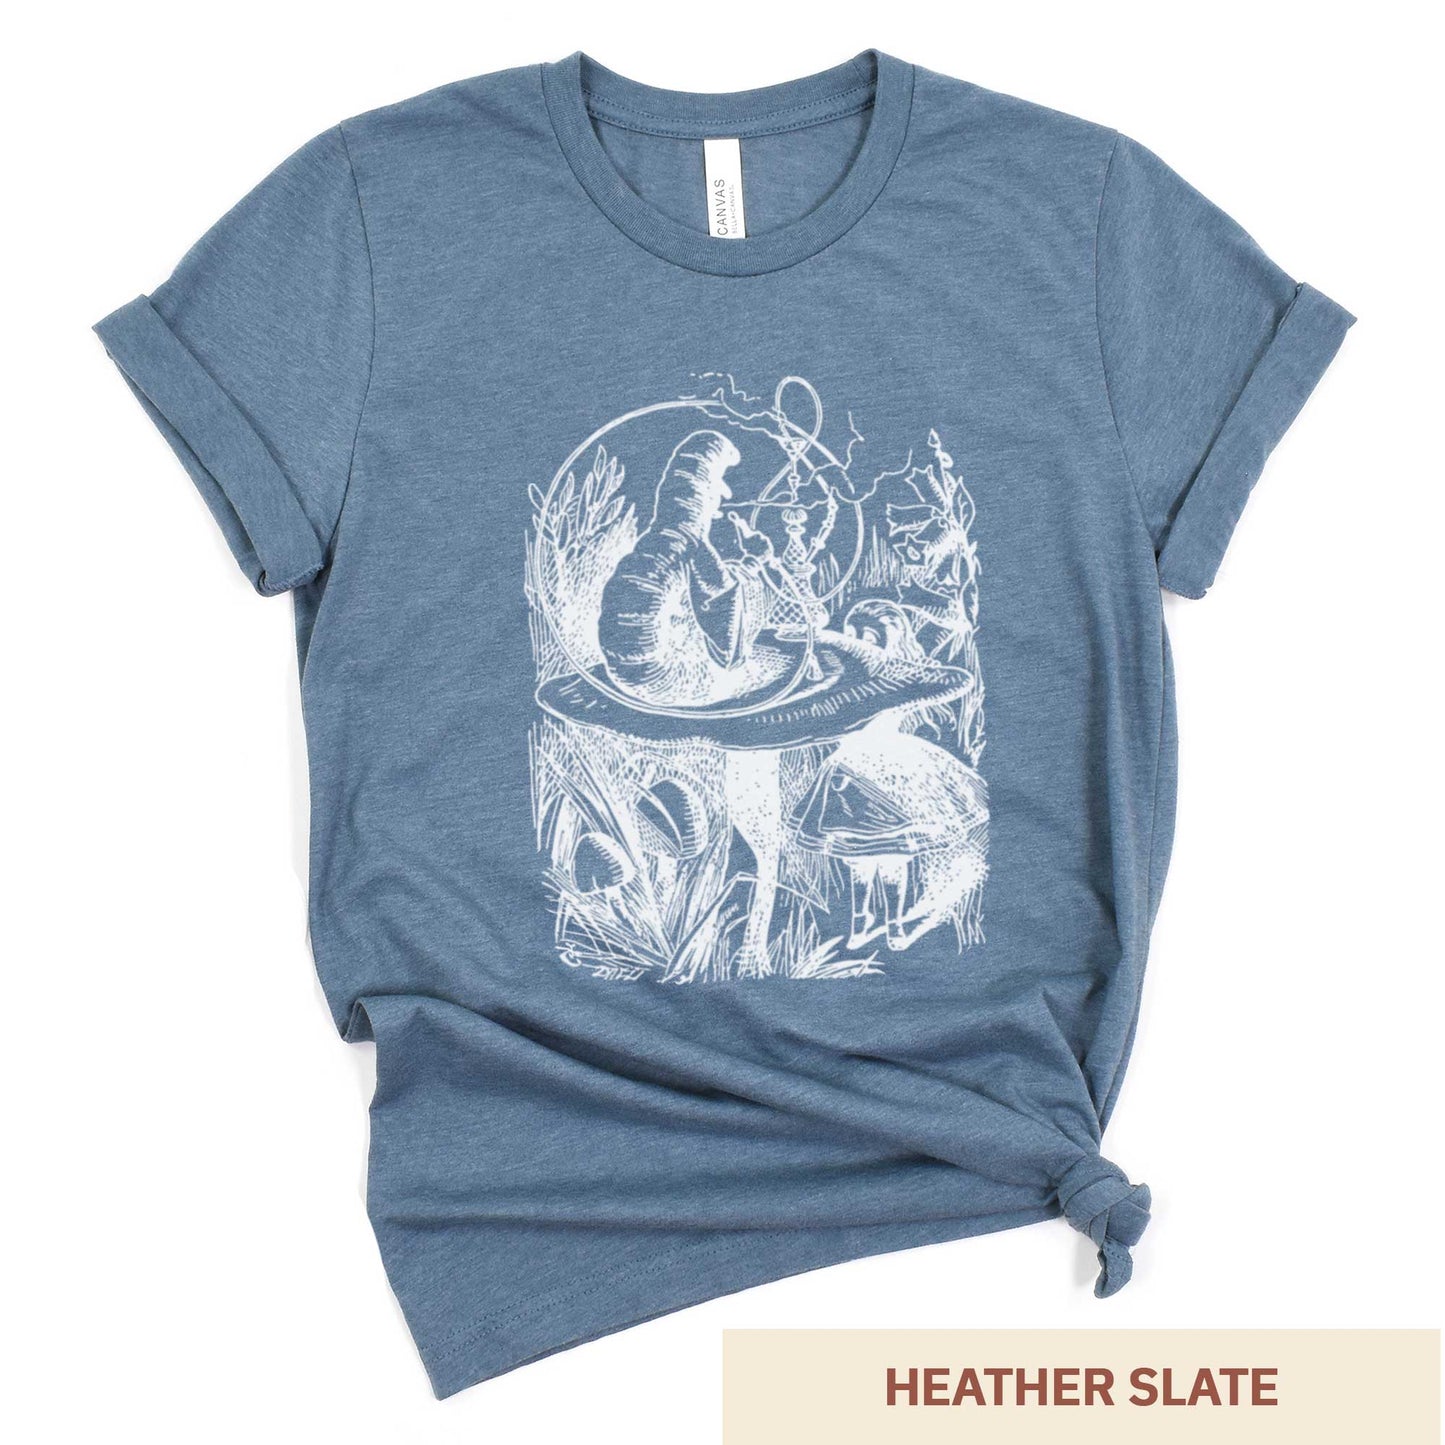 A heather slate Bella Canvas t-shirt featuring the John Tenniel illustration of Alice in Wonderland meeting the caterpillar who is sitting on a mushroom.